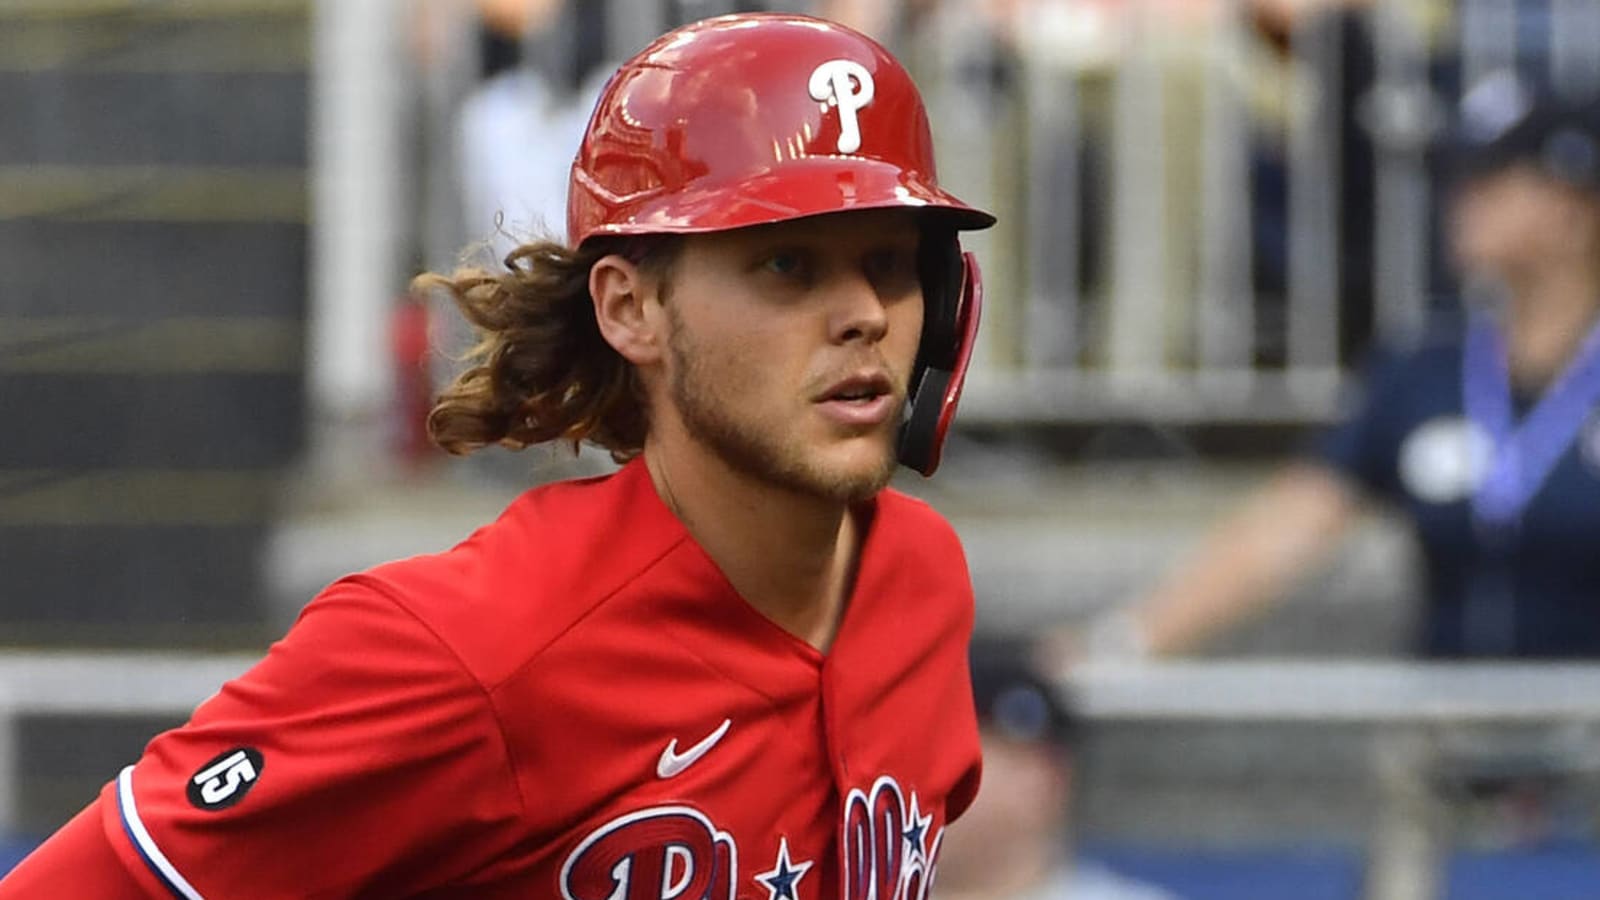 Alec Bohm seemed fed up with Phillies fans during brutal game